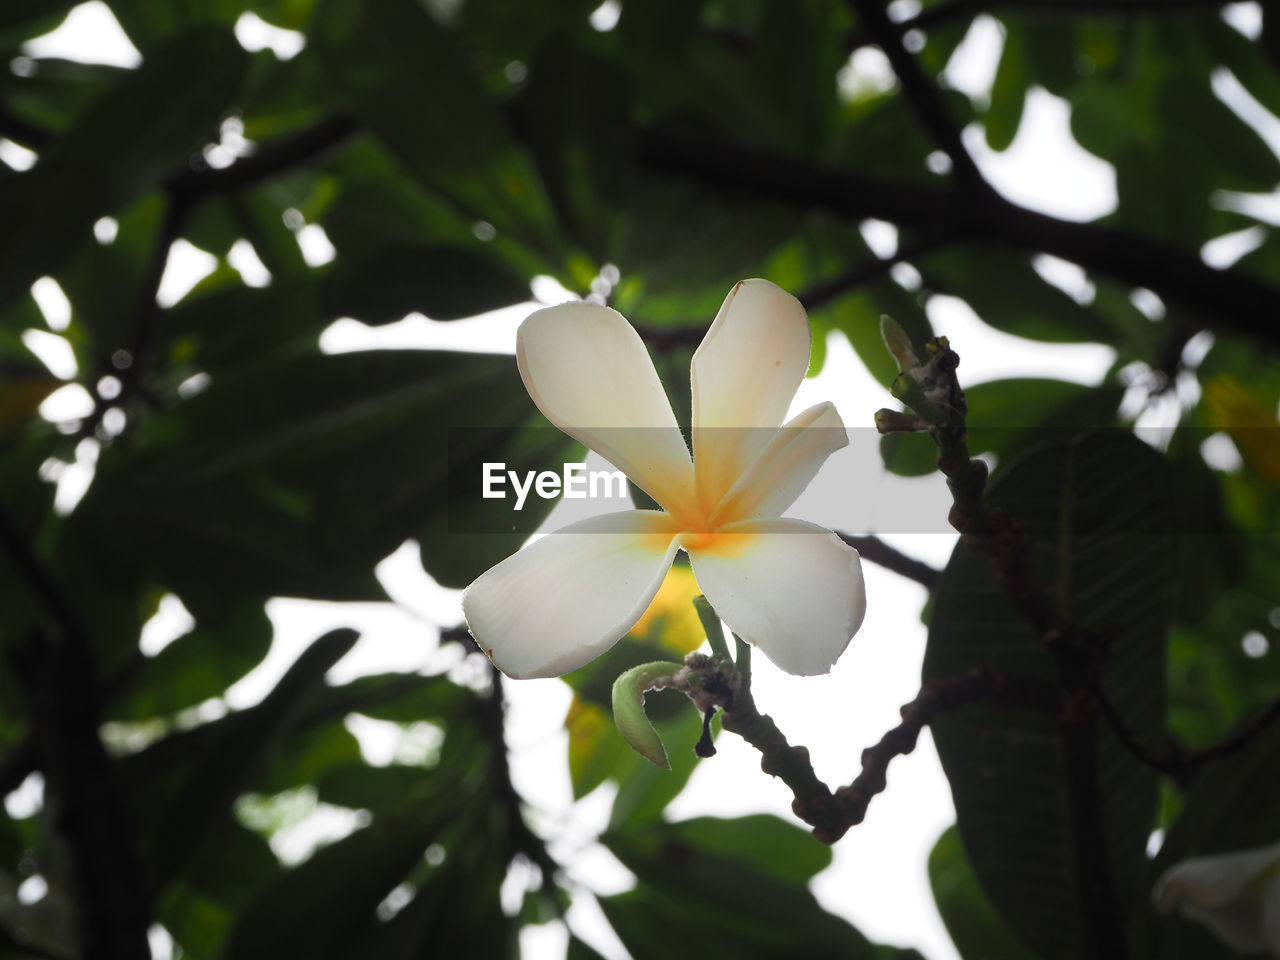 CLOSE-UP OF FRANGIPANI BLOOMING ON PLANT